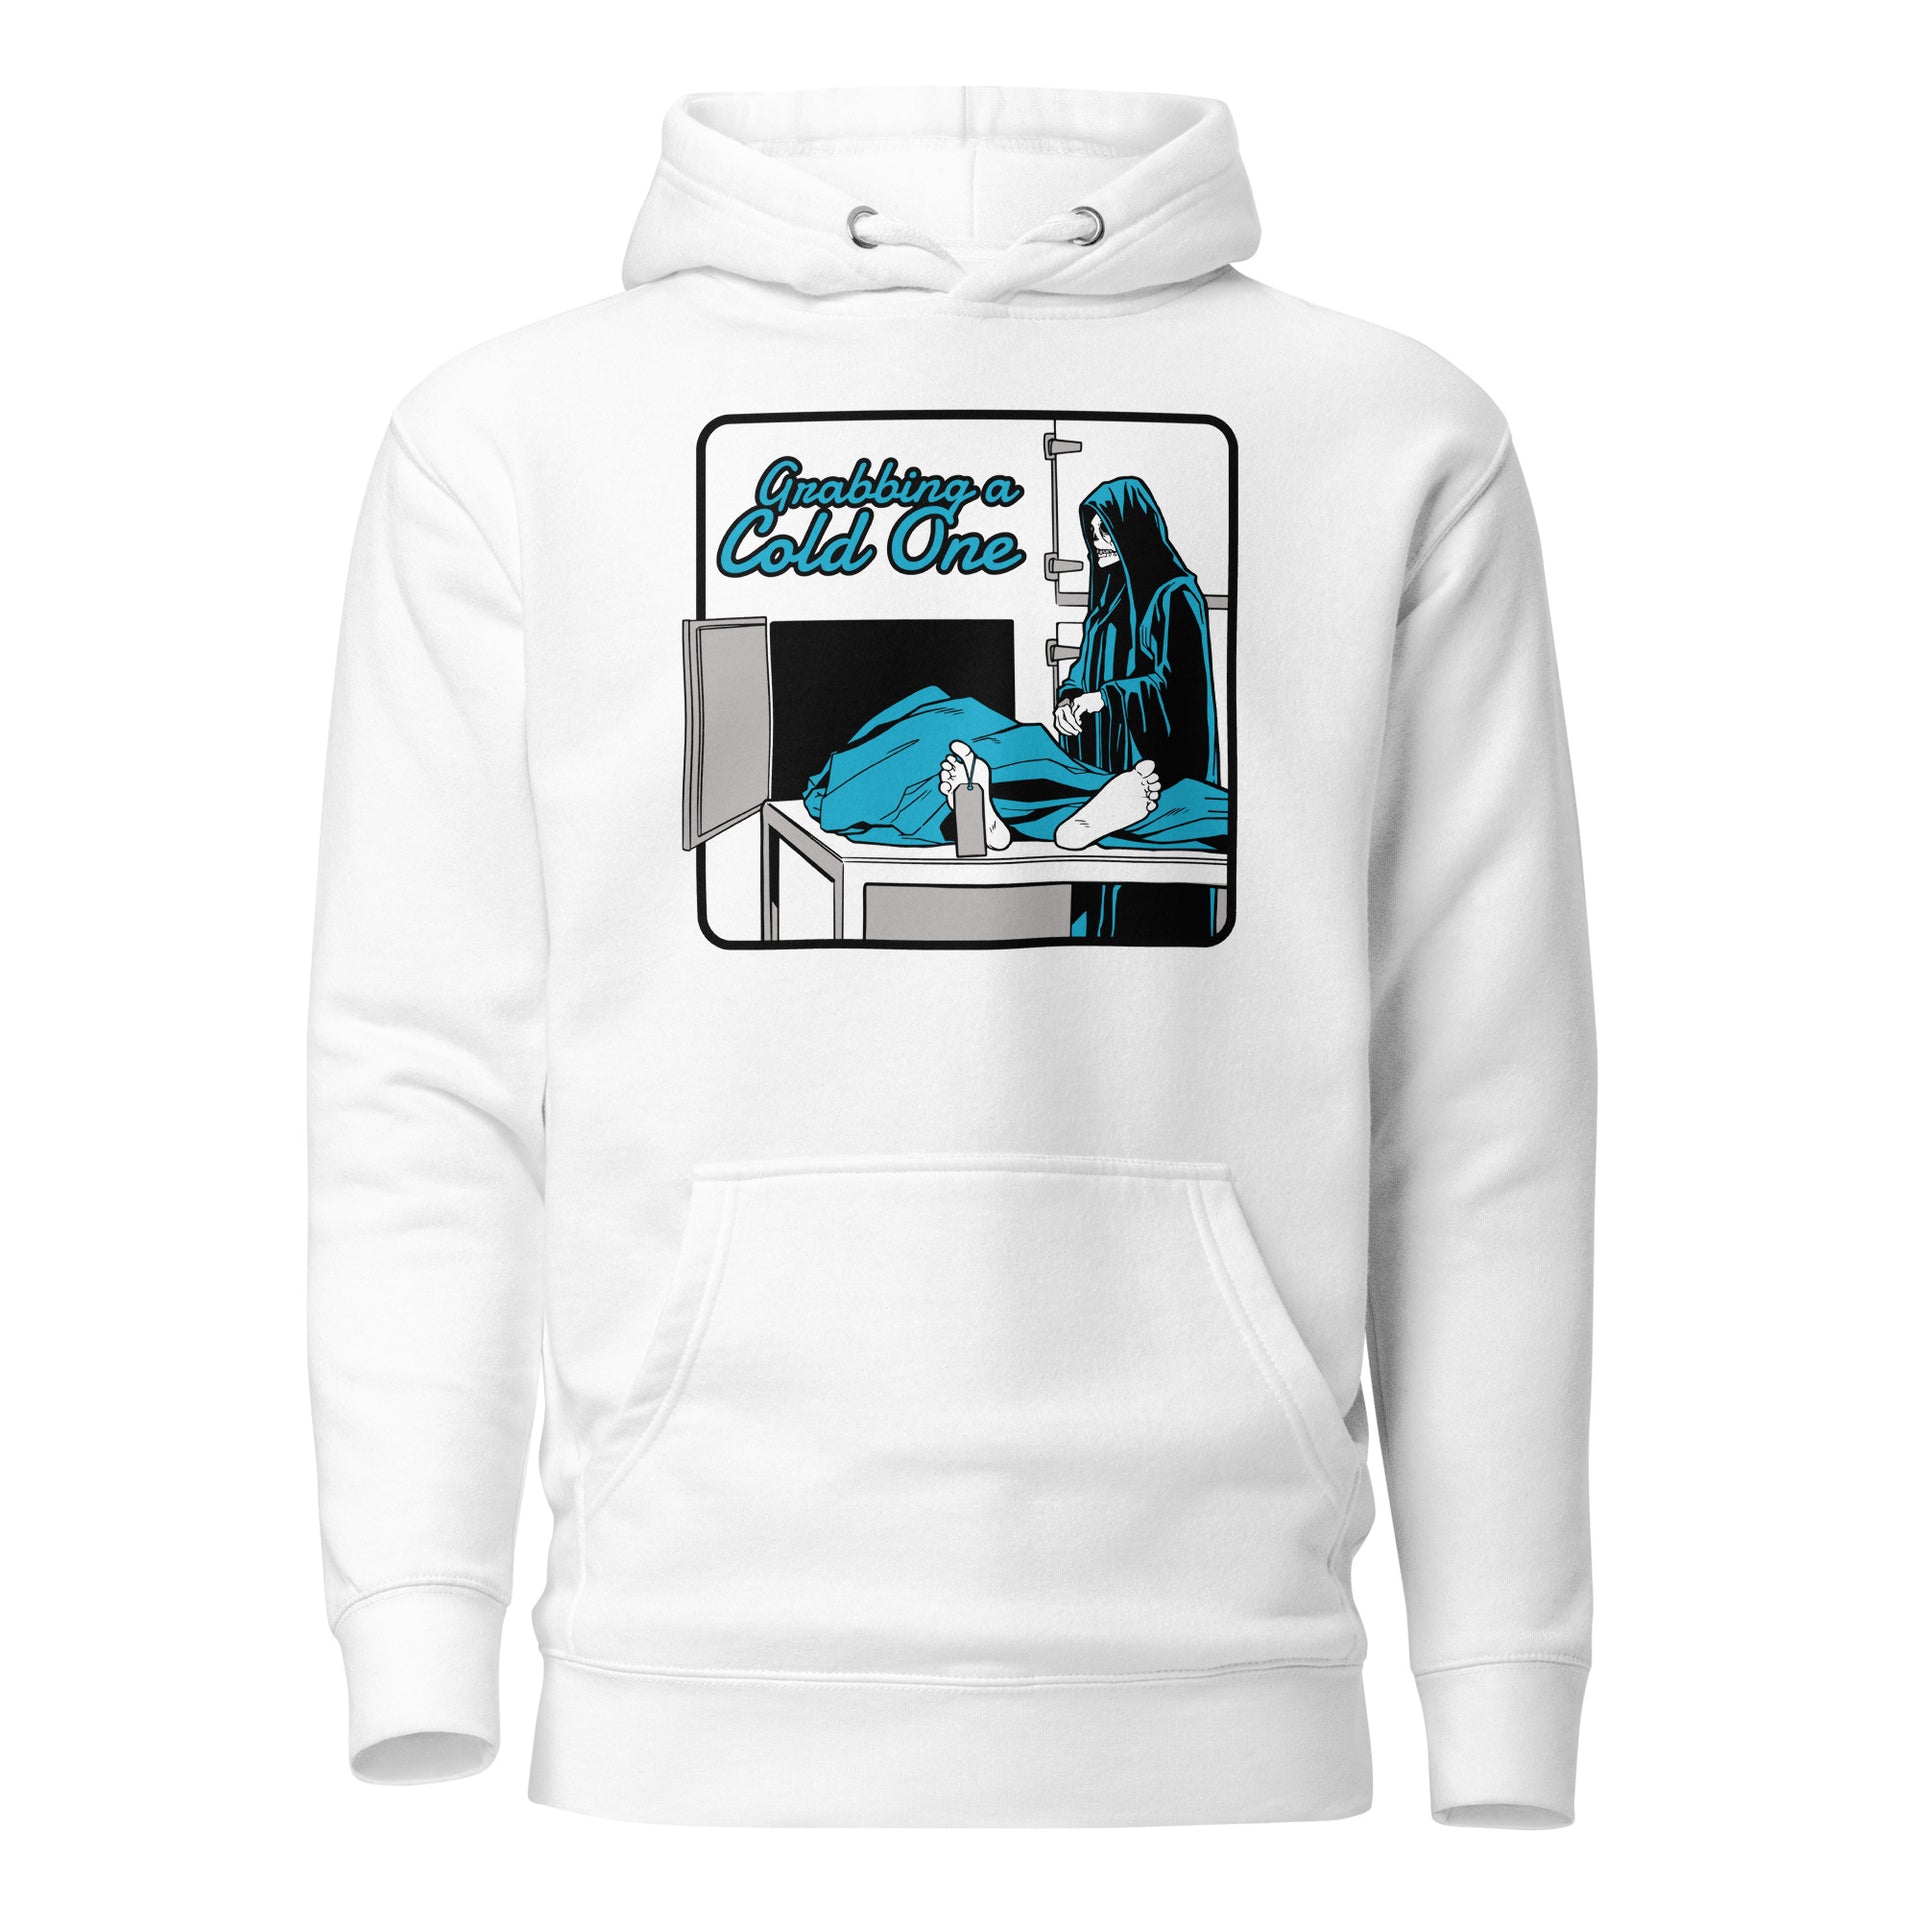 Grabbing A Cold One Unisex Hoodie